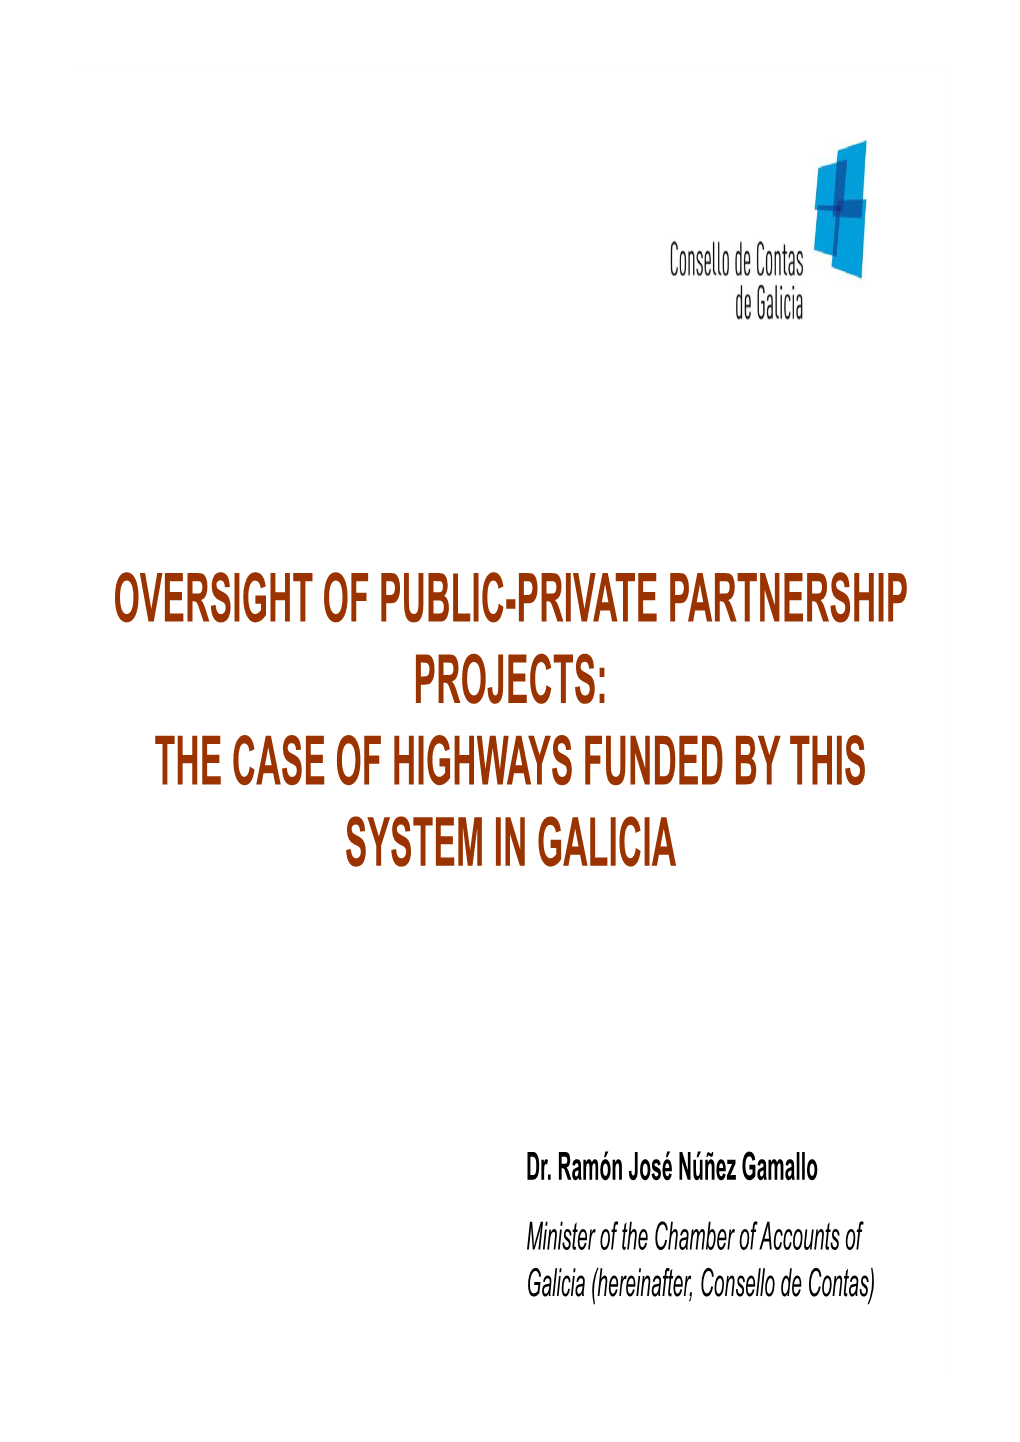 Oversight of Public-Private Partnership Projects: the Case of Highways Funded by This System in Galicia